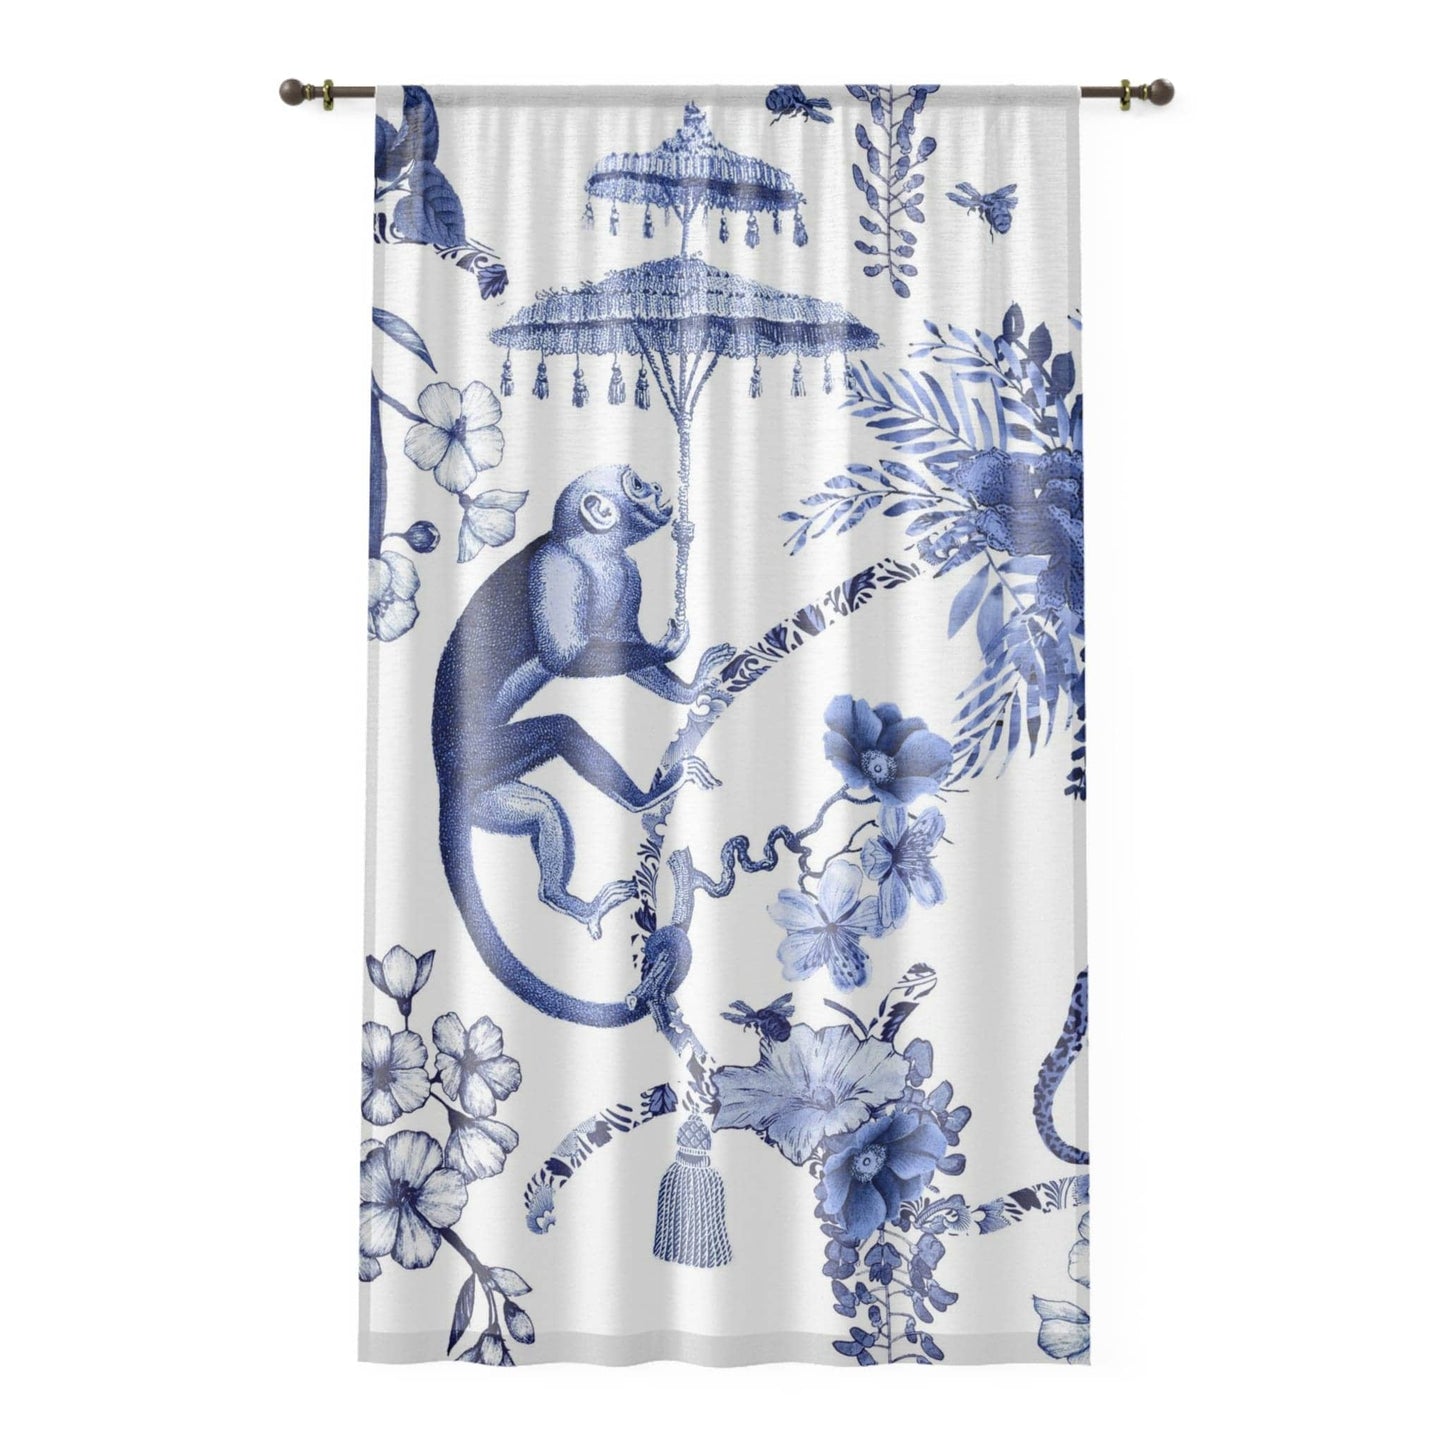 Kate McEnroe New York Chinoiserie Jungle Botanical Toile Window Curtains, Blue, White Chinoiserie Floral Curtain Panels, Country Farmhouse Decor - 122581123 Window Curtains